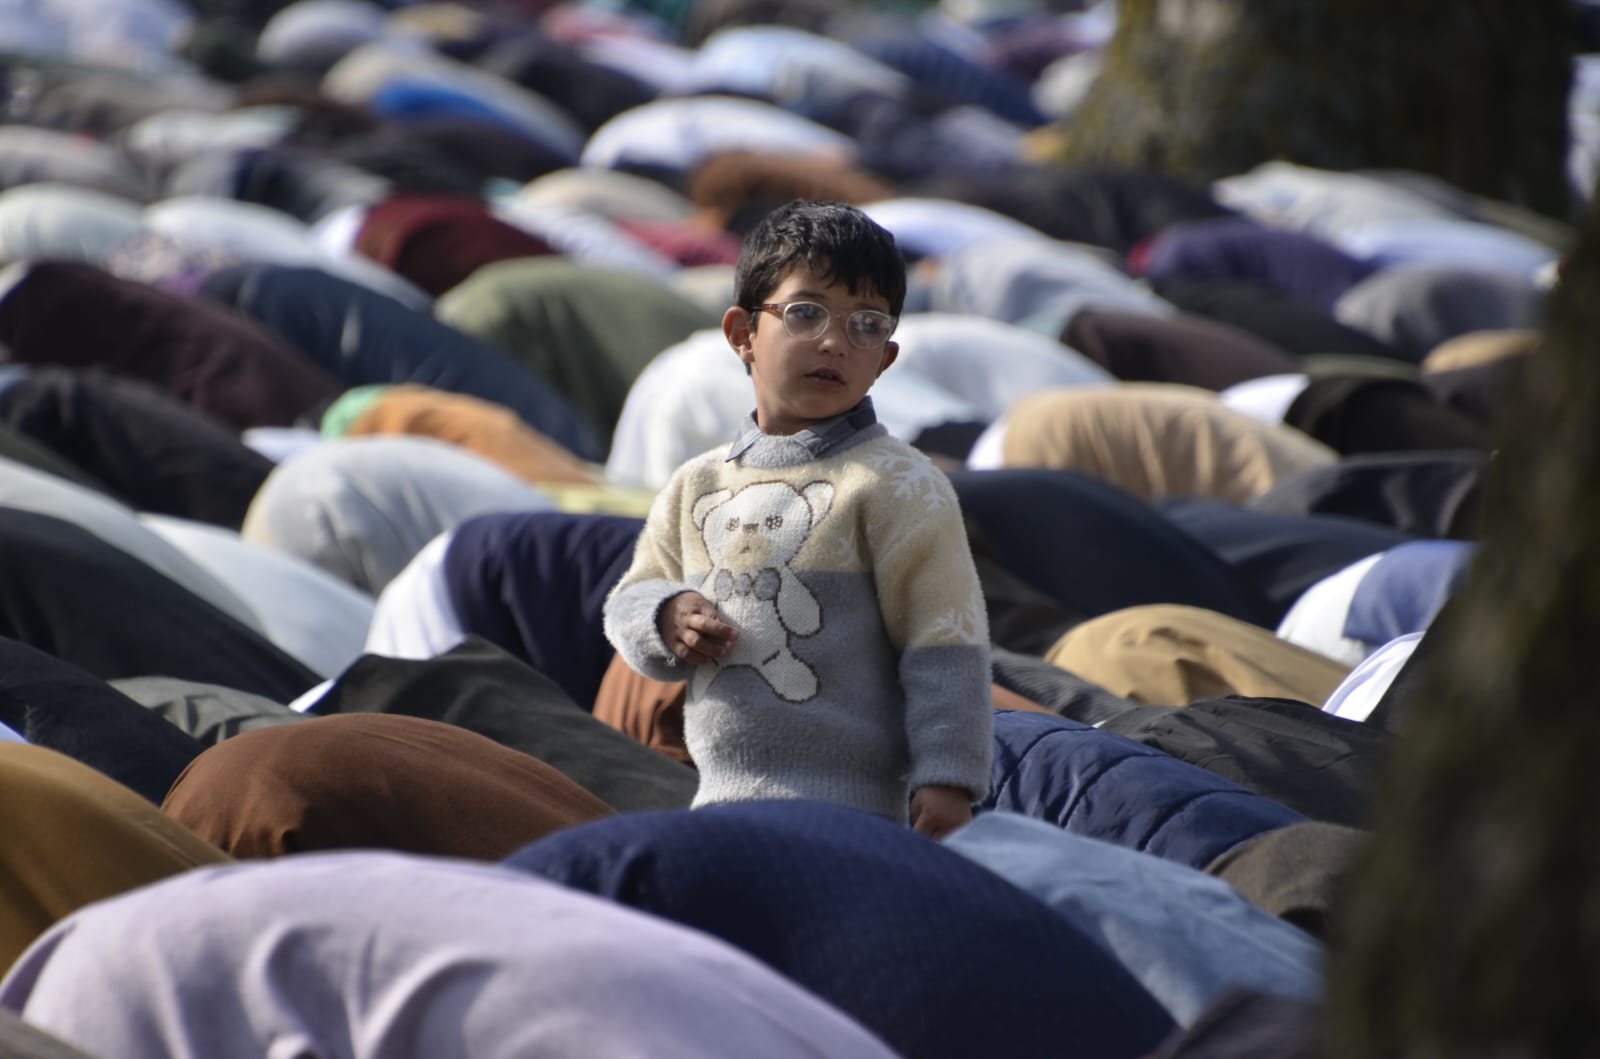 A child stands amidst the ongoing Eid-ul-Fitr prayers at an Eid Gah in Kashmir. (KL-image Majid Maqbool)